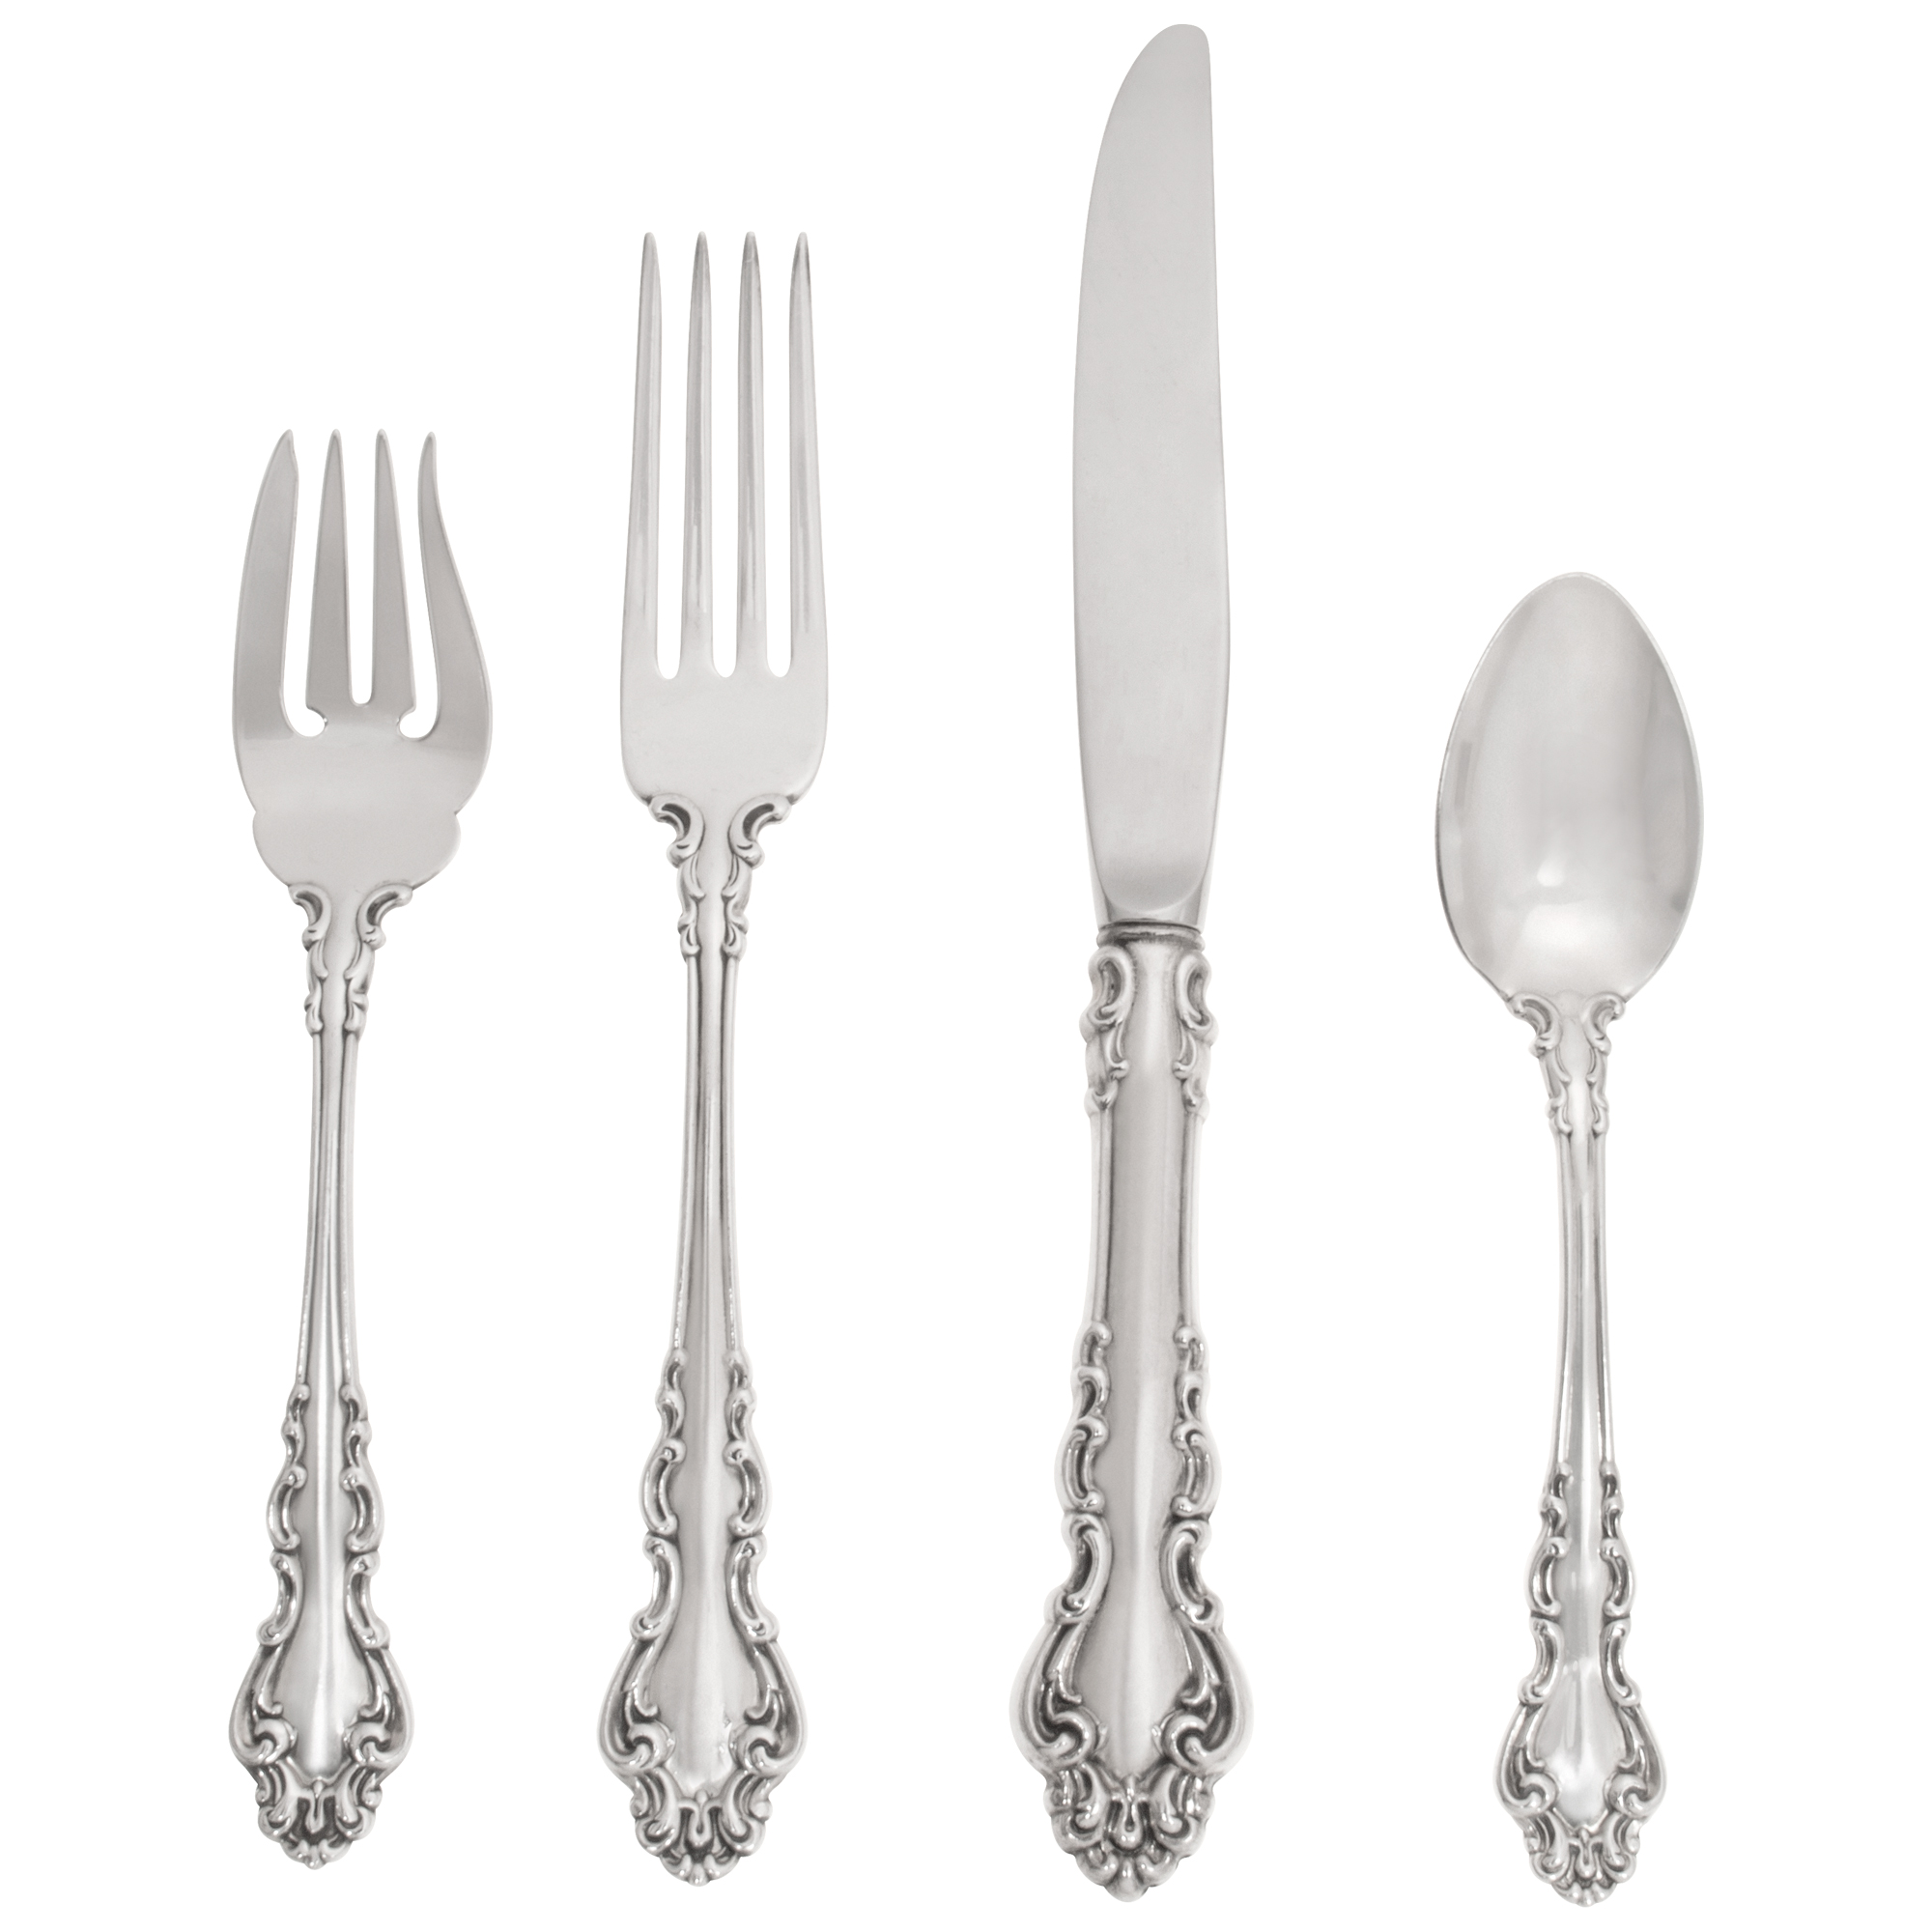 SPANISH BAROQUE, Reed and Barton, sterling silver flatware set patented in 1965- 4 place set for 12 (double tea spoons and 8 serving pieces, TOTAL 68  PIECES. image 1